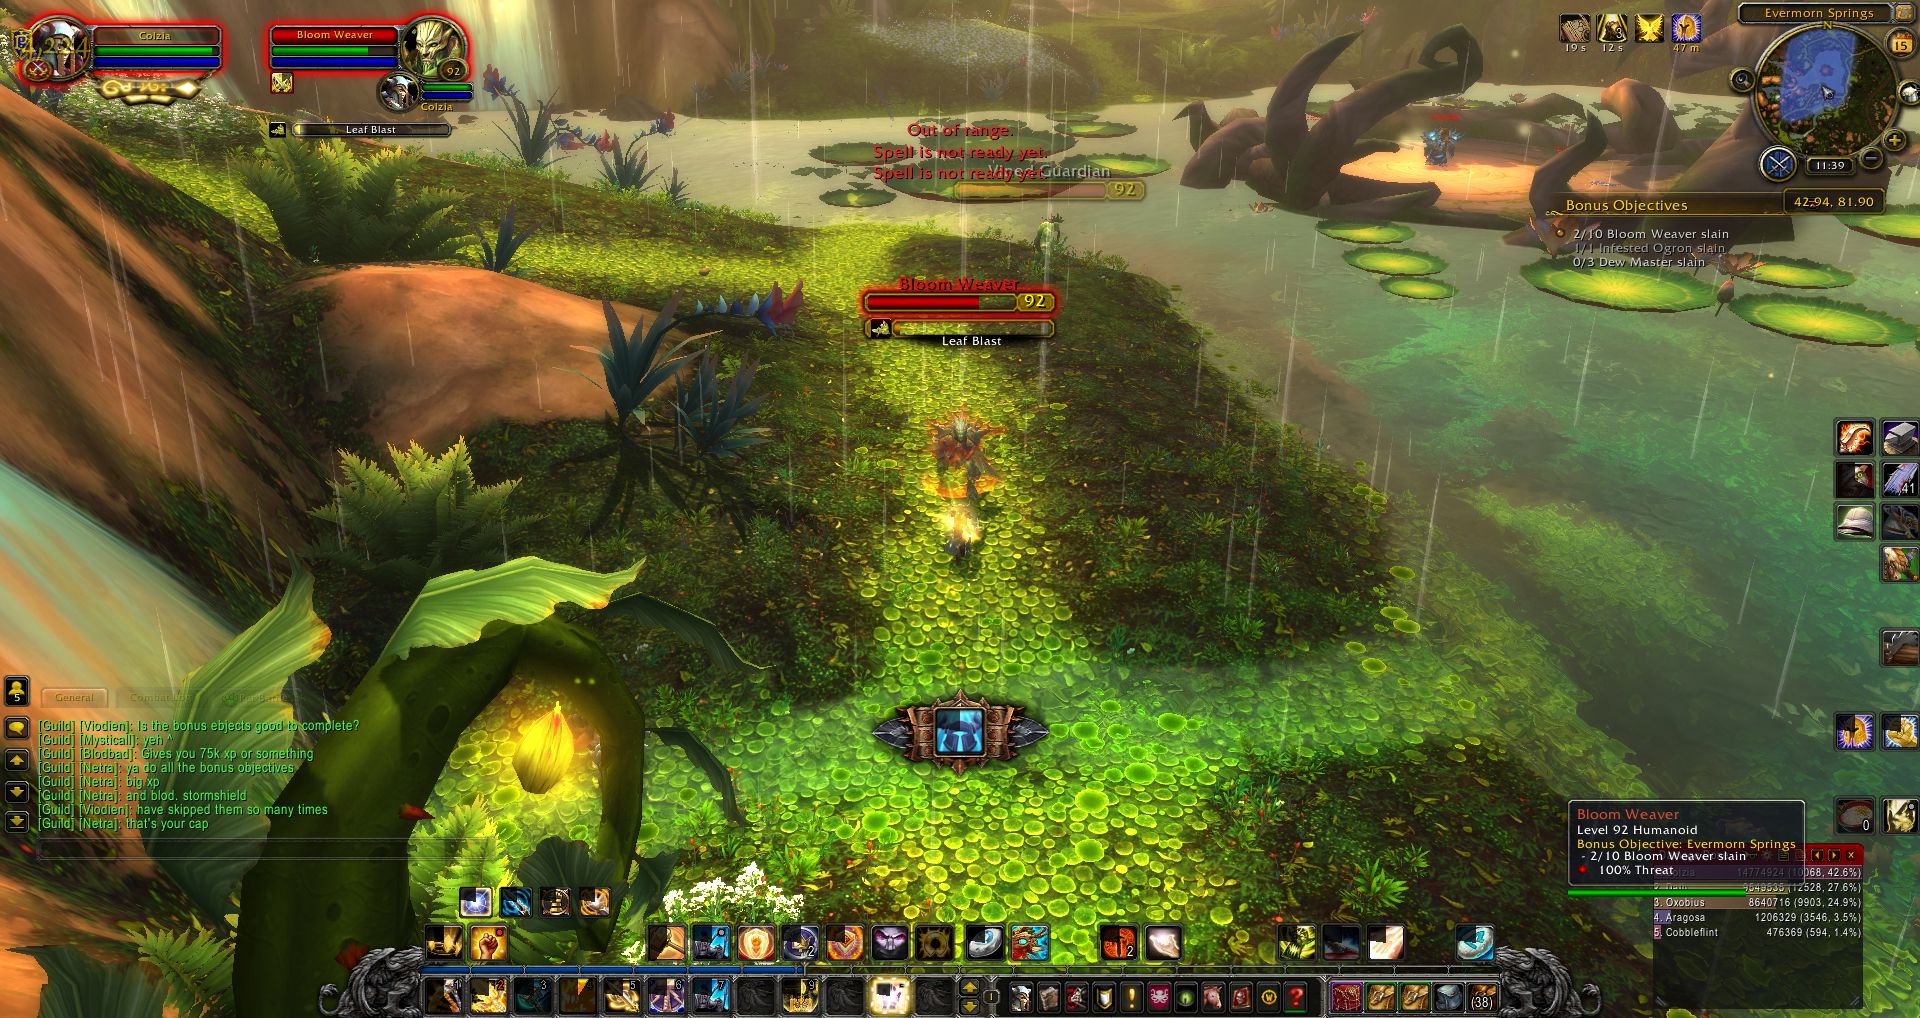 Evermorn Springs wow